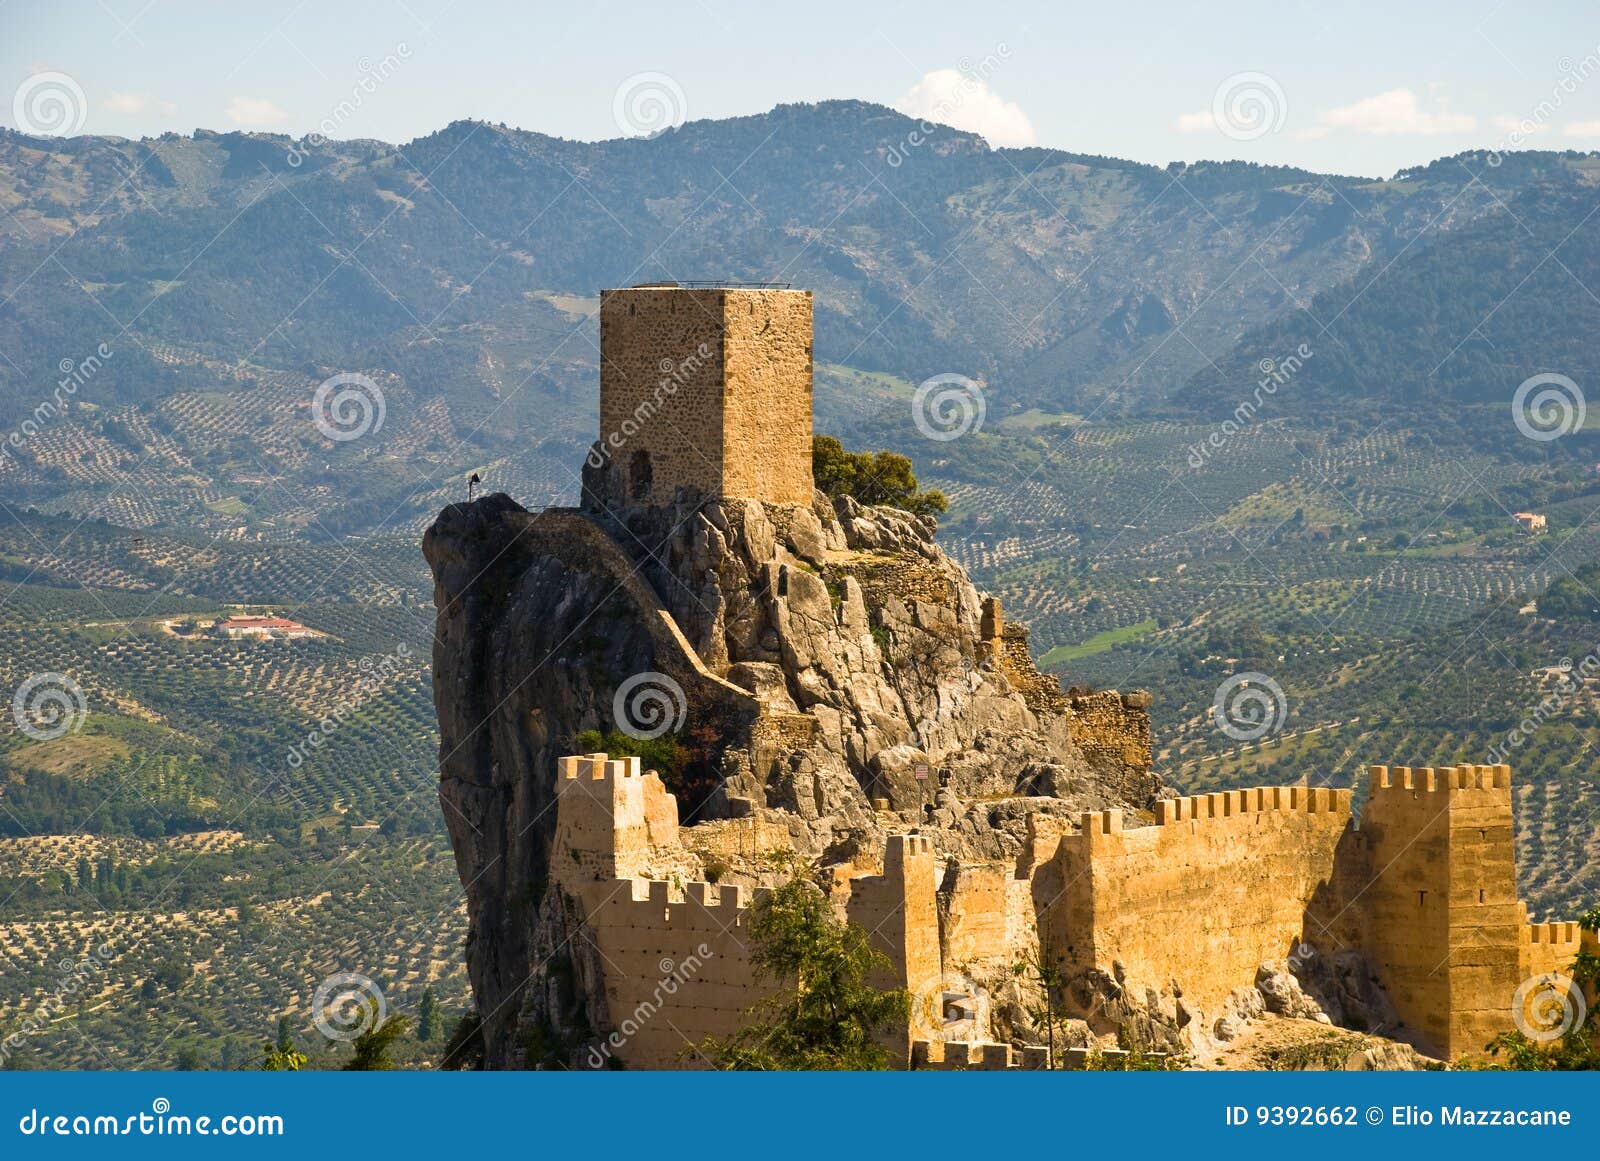 the castle of cazorla in andalusia, spain